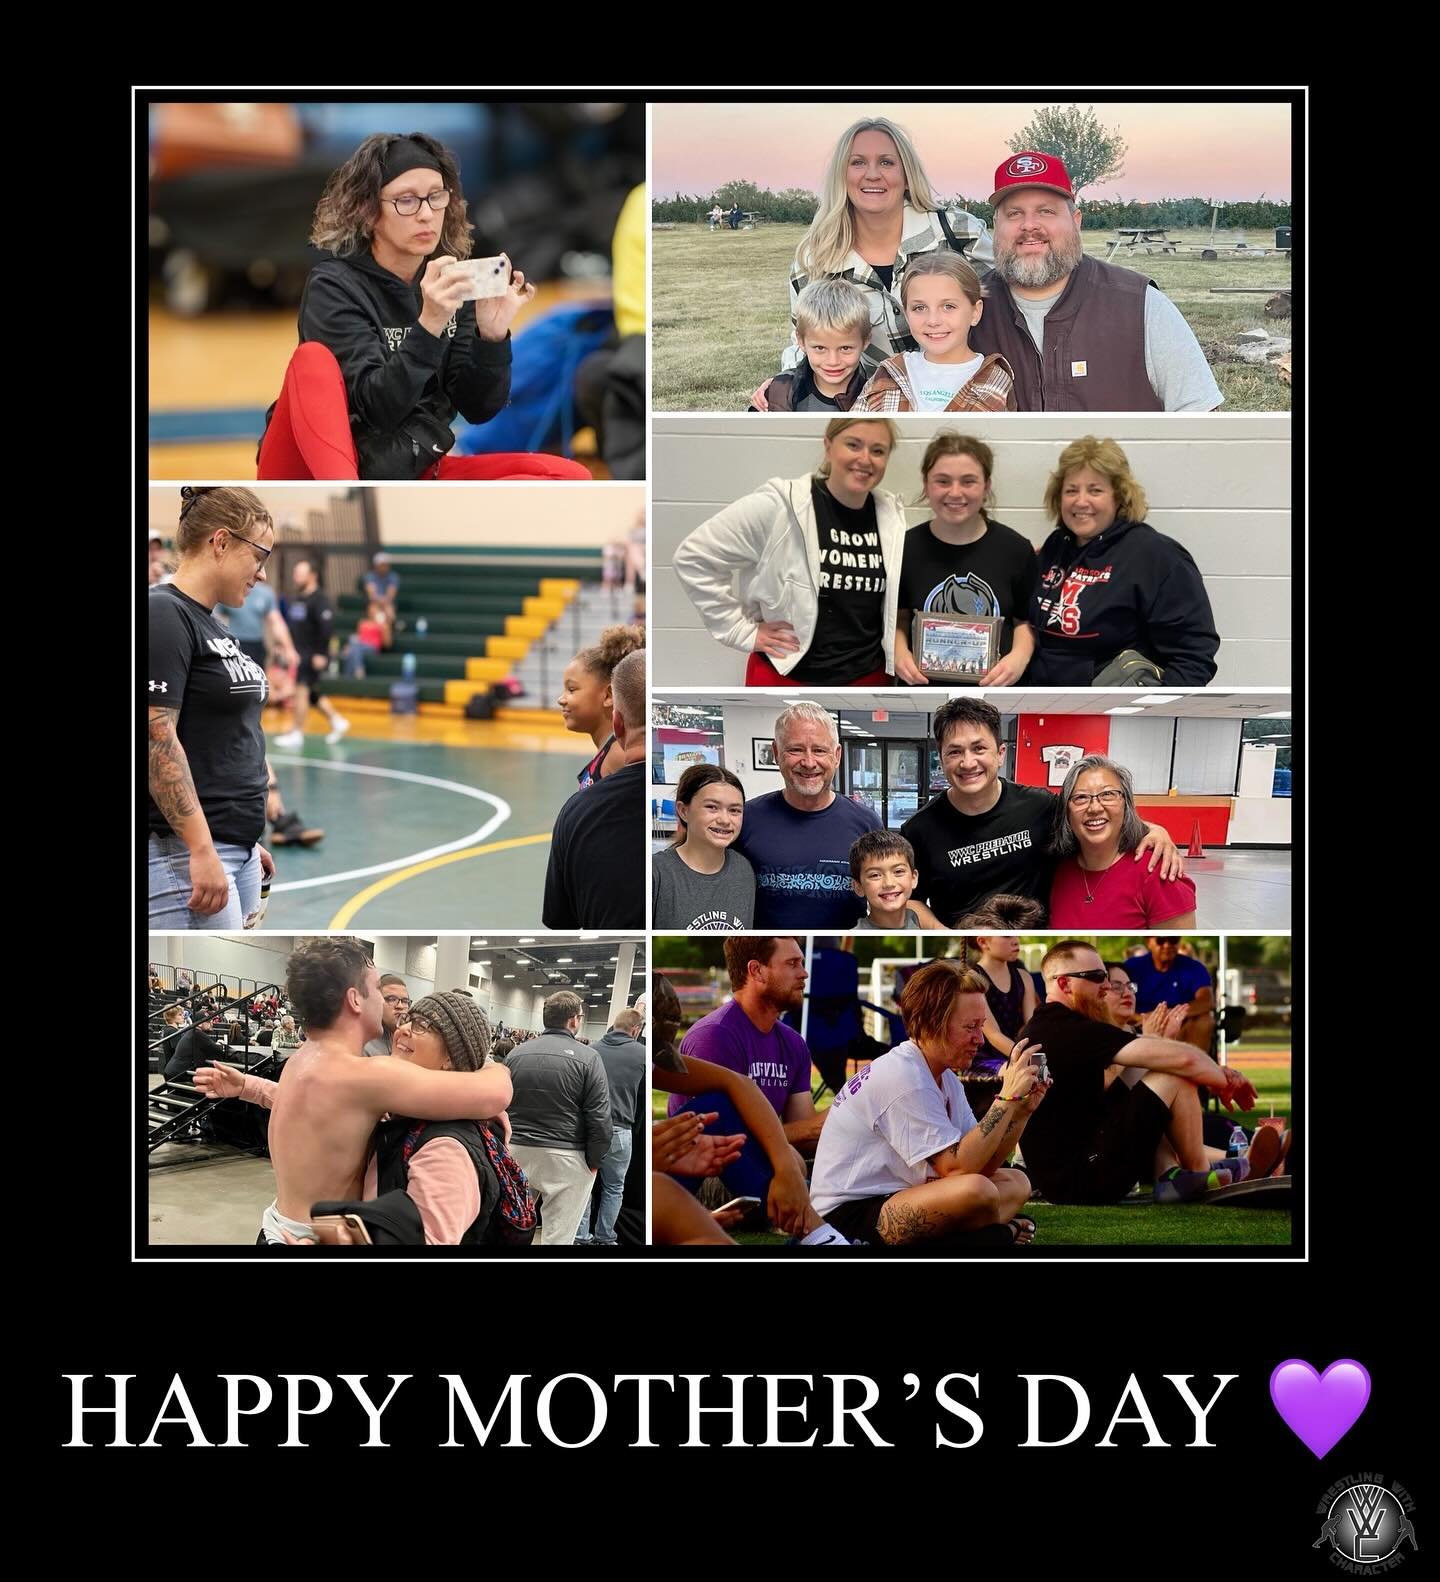 Happy Mother&rsquo;s Day 💜 #WWCFamily #happymothersday